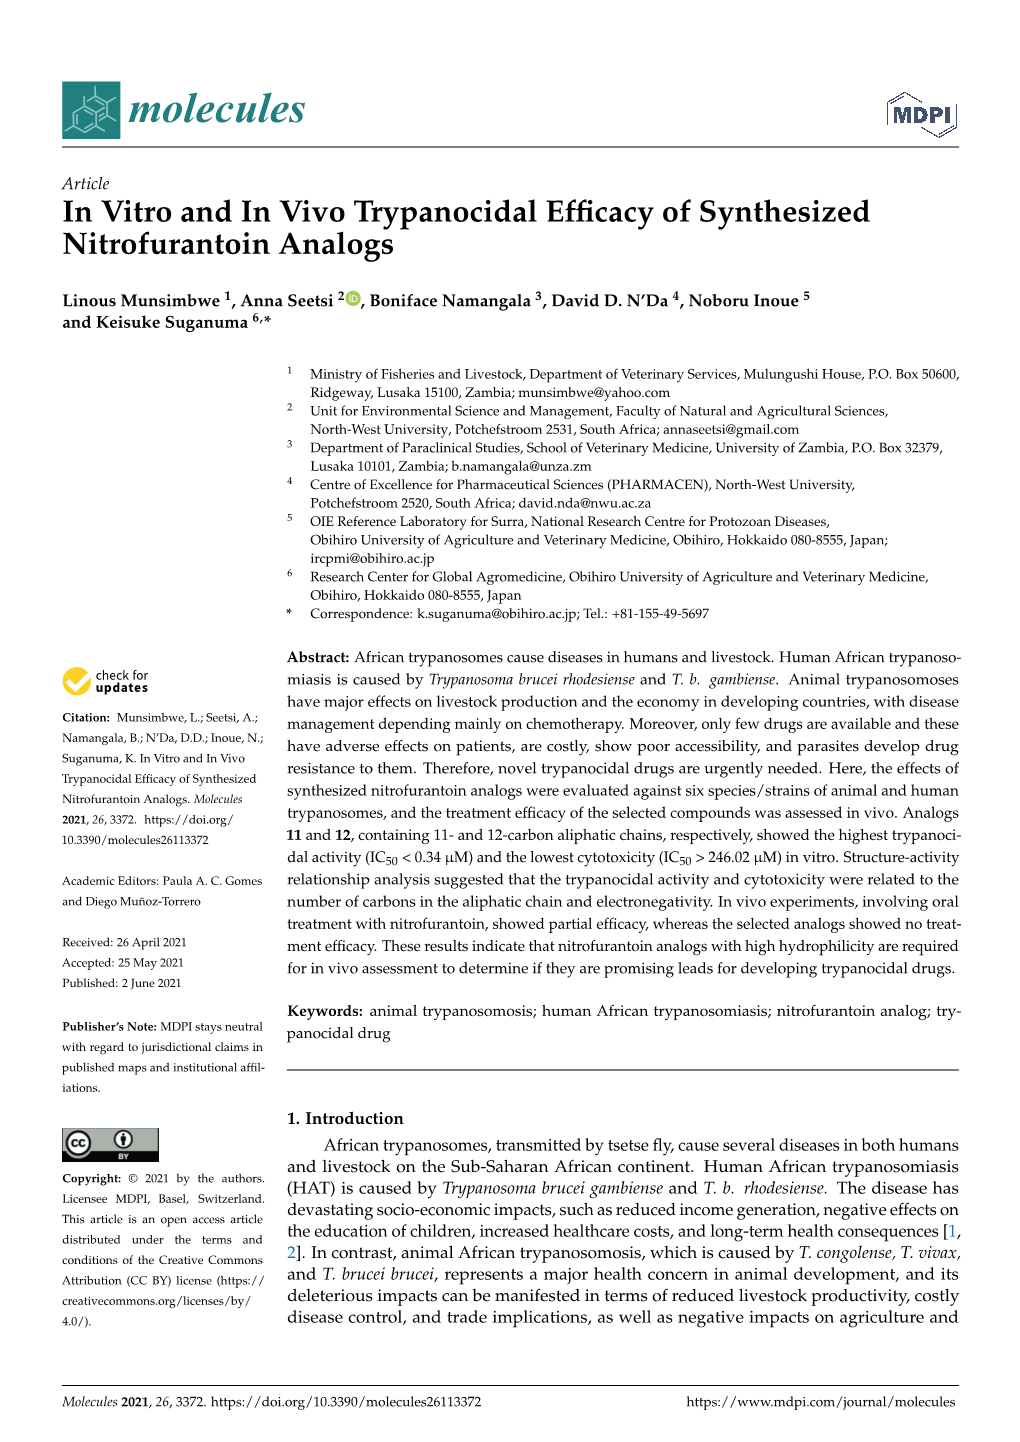 In Vitro and in Vivo Trypanocidal Efficacy of Synthesized Nitrofurantoin Analogs